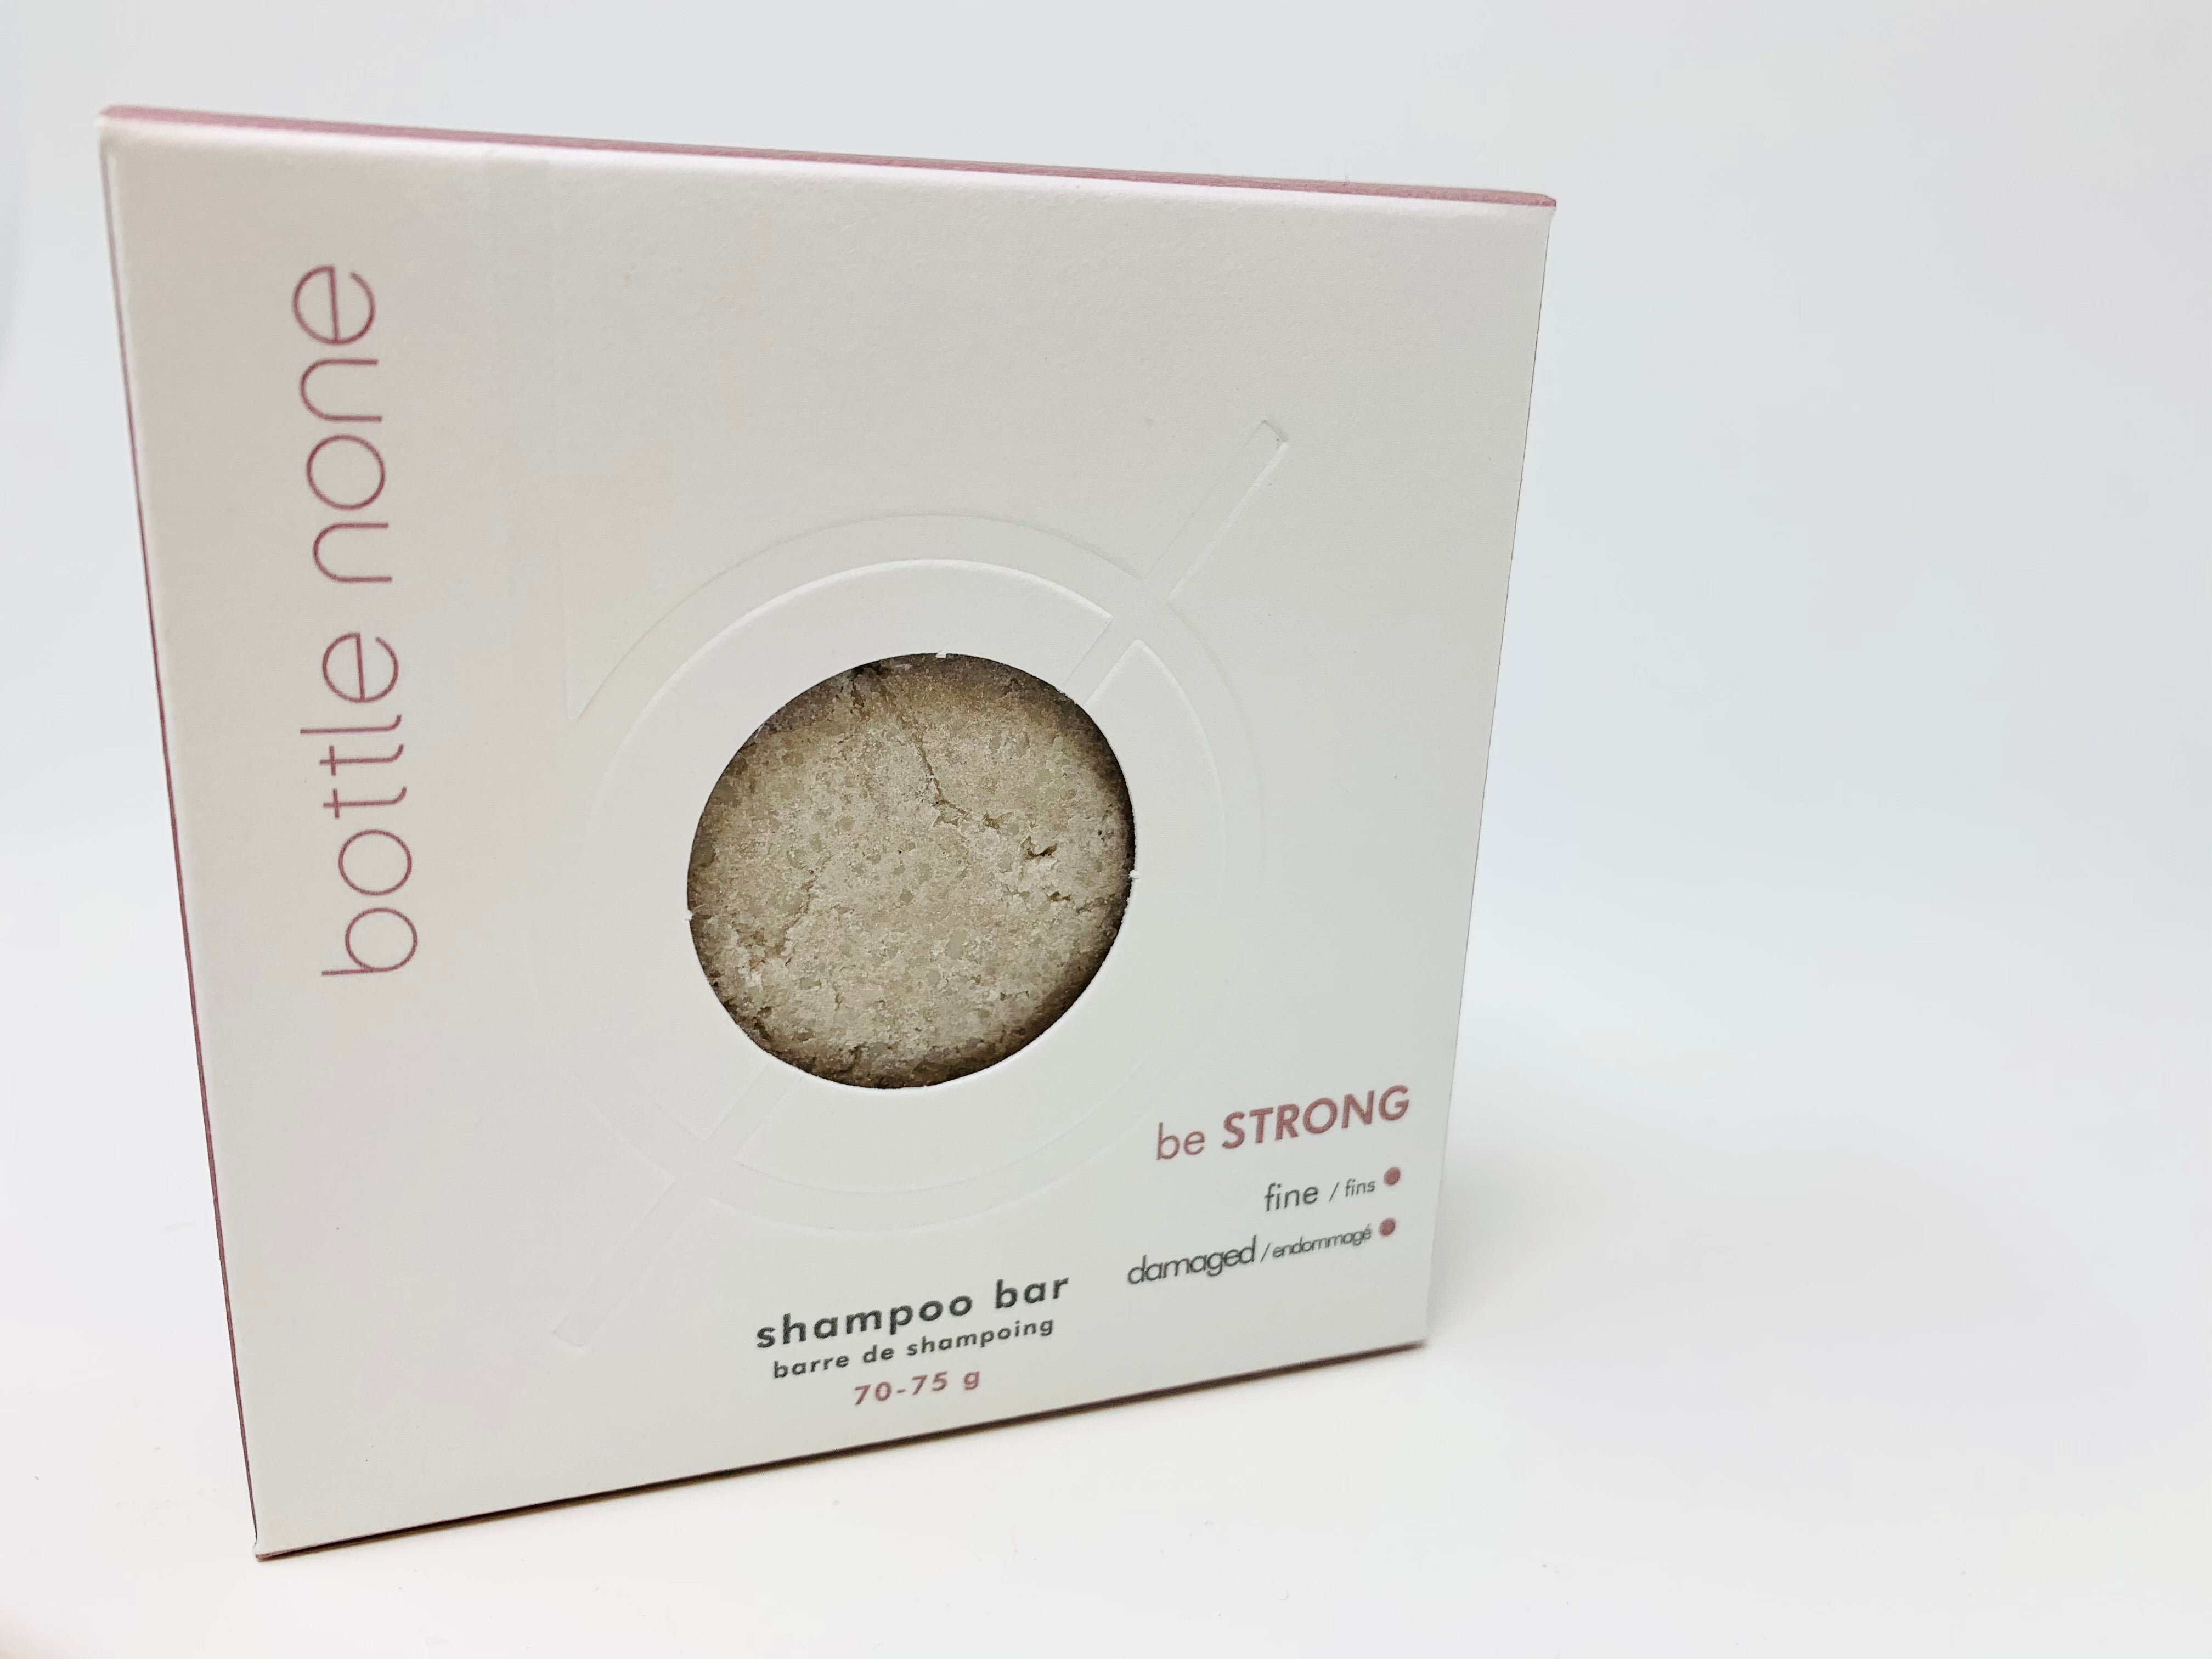 be STRONG Shampoo Bar 70-75g be STRONG - nelsonnaturals remineralizing toothpaste